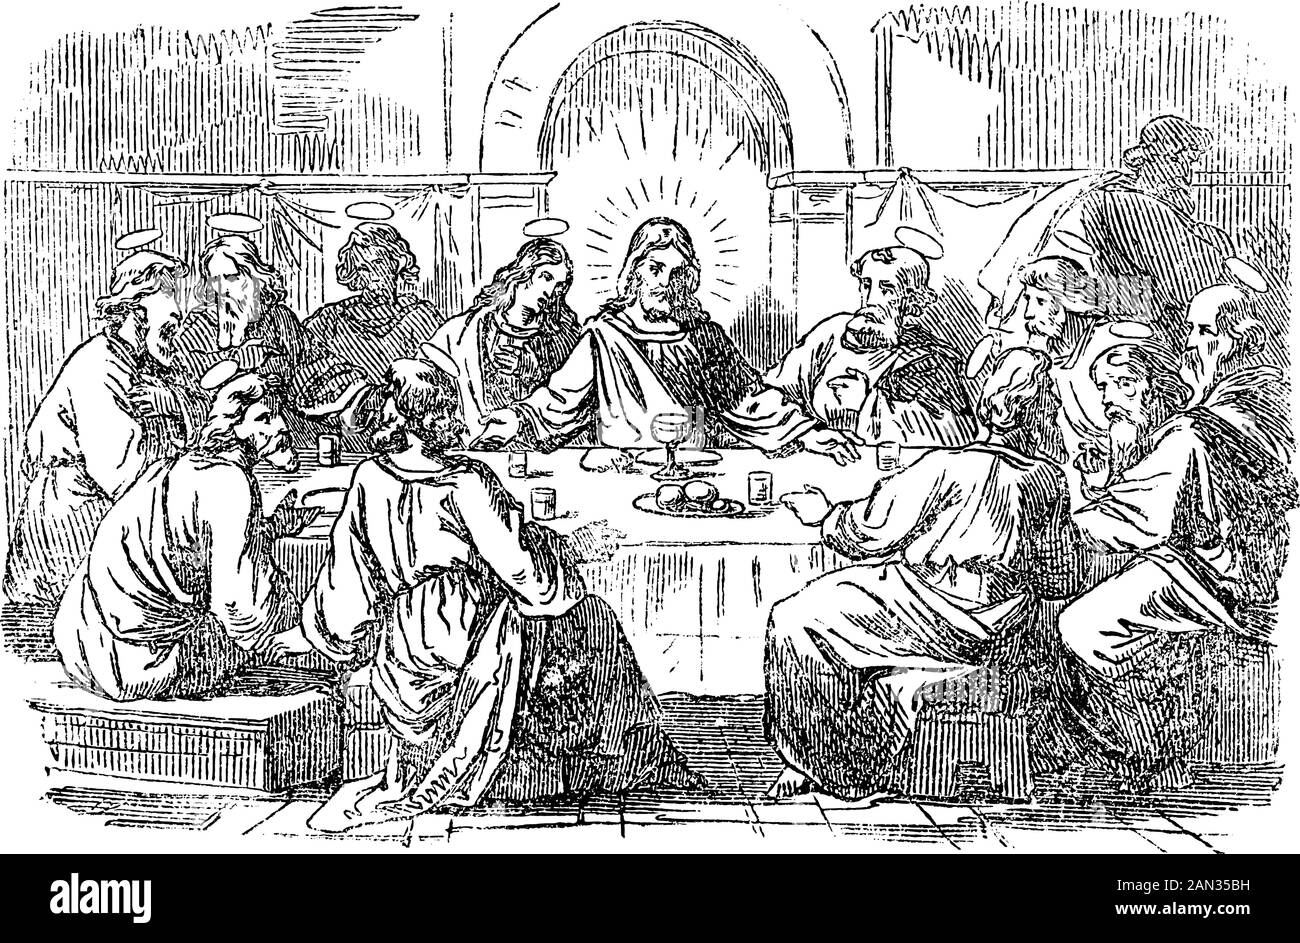 Vintage drawing or engraving of biblical story of Jesus and the last supper. Jesus and twelve disciples are eating around the table.Bible,New Testament,Matthew 26,Mark 14,Luke 22,John 13. Biblische Geschichte , Germany 1859. Stock Vector